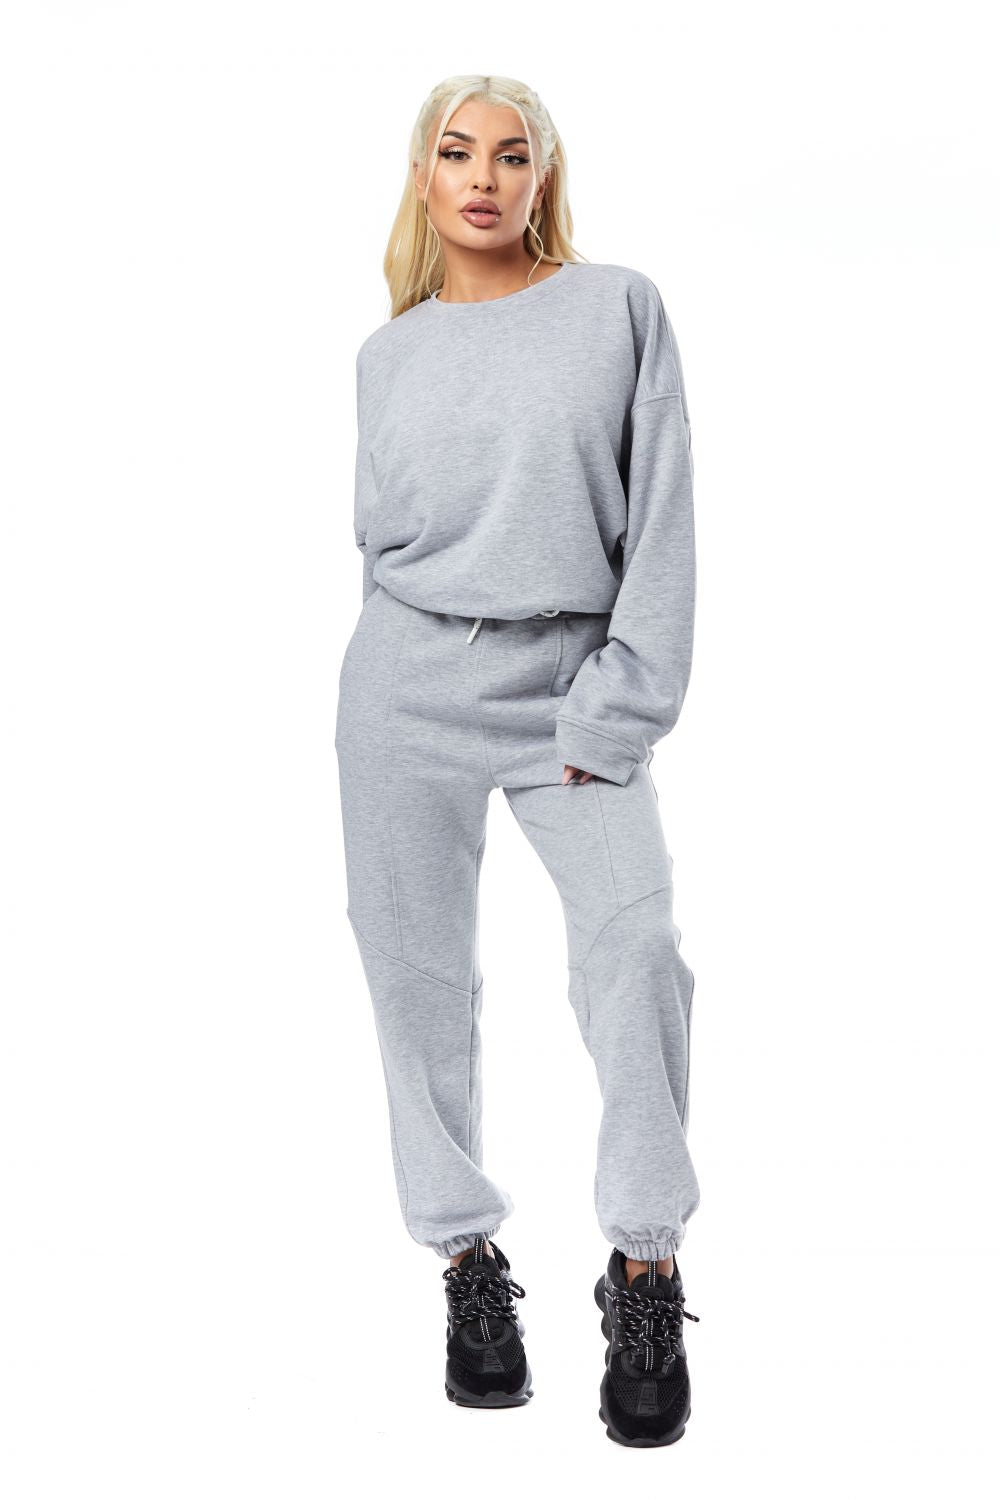 Casual cotton set in gray by Onesimus Bogas